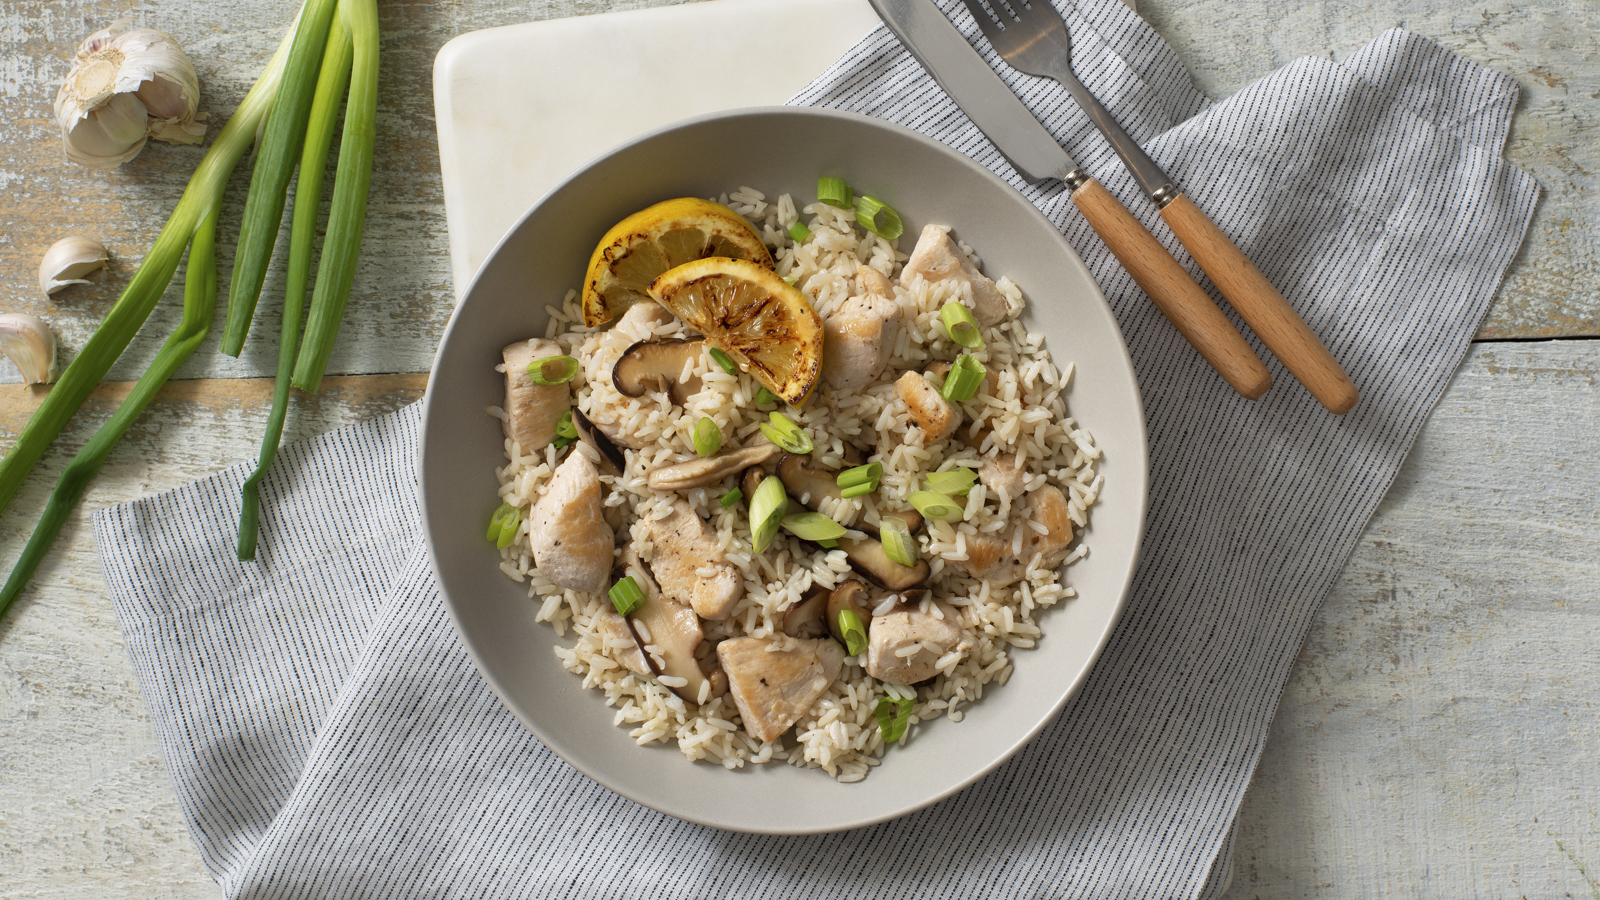 Lemon Pepper Chicken and White Rice | Success® Rice